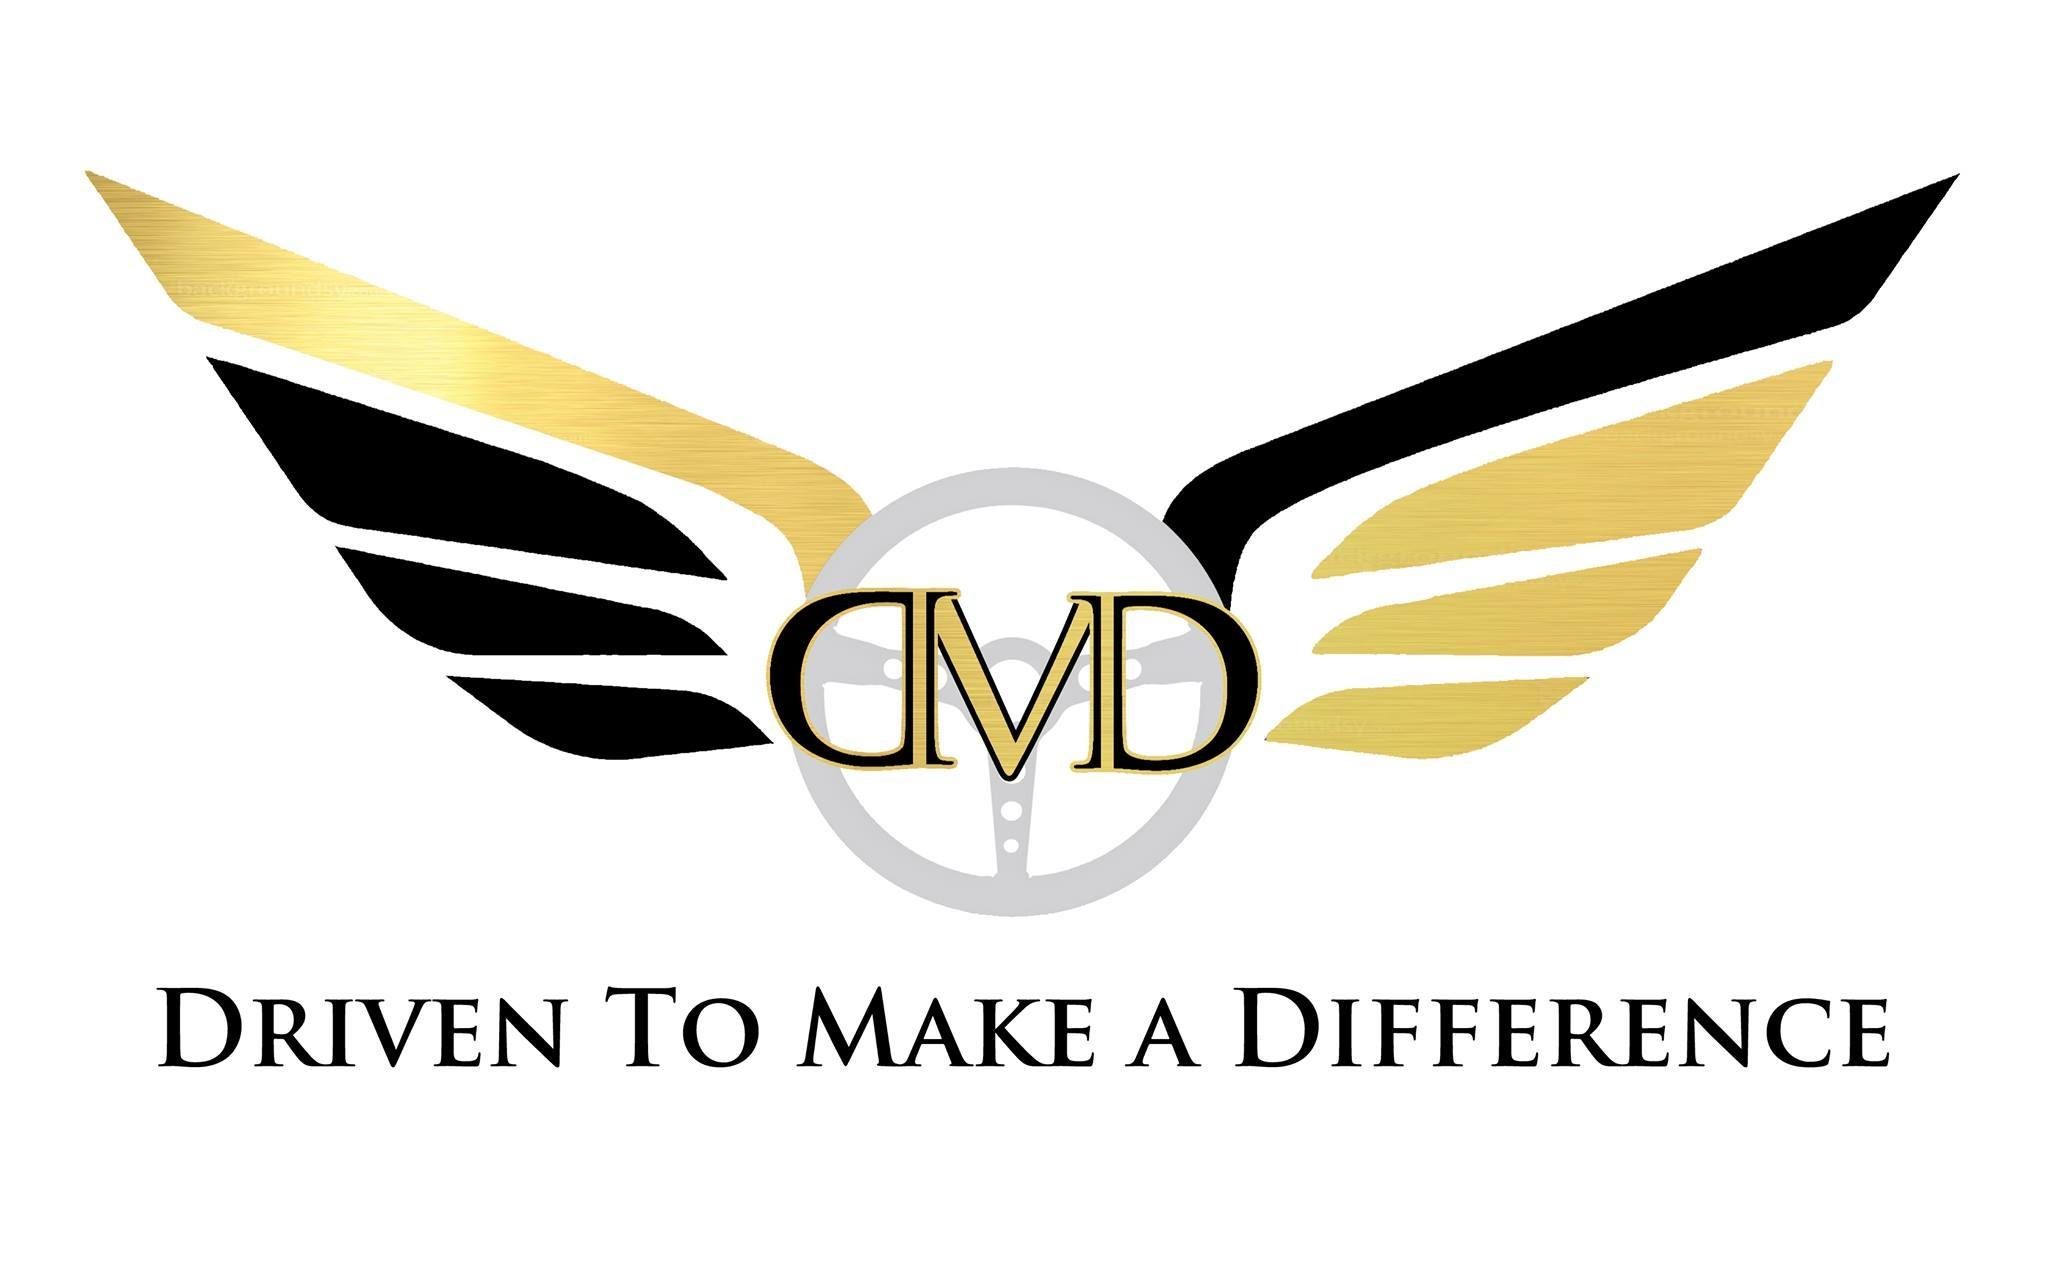 Driven To Make a Difference